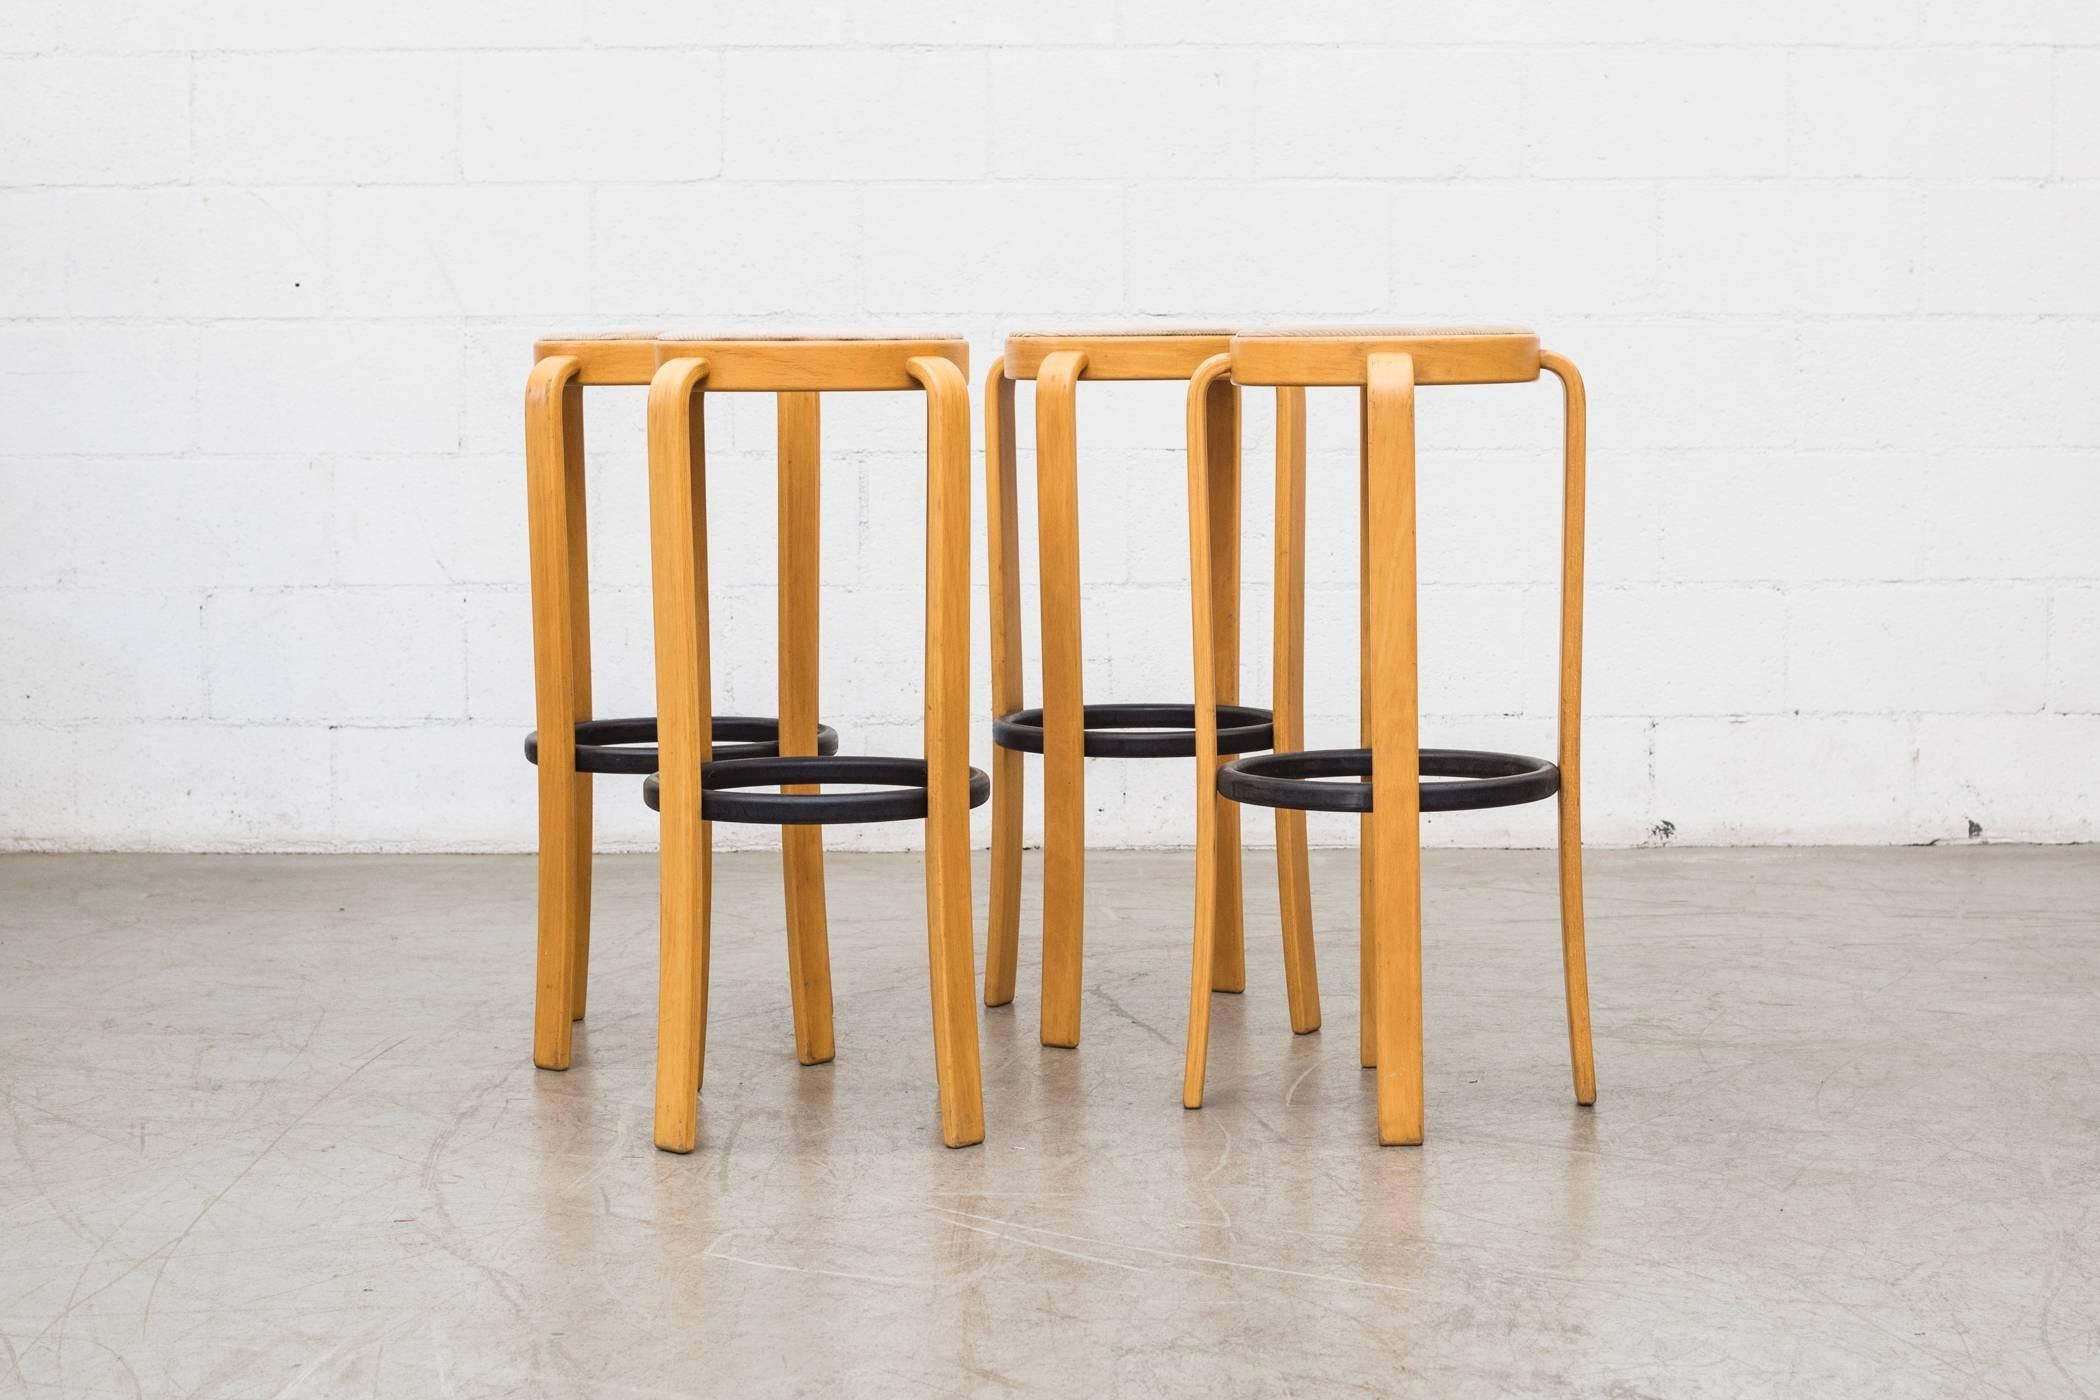 Birch bentwood legged bar stools in original condition with ebony foot rests and original corduroy seats. Two sets of four available.
Measures: 12.625/14.25 x 12.625/14.25 x 32.25.